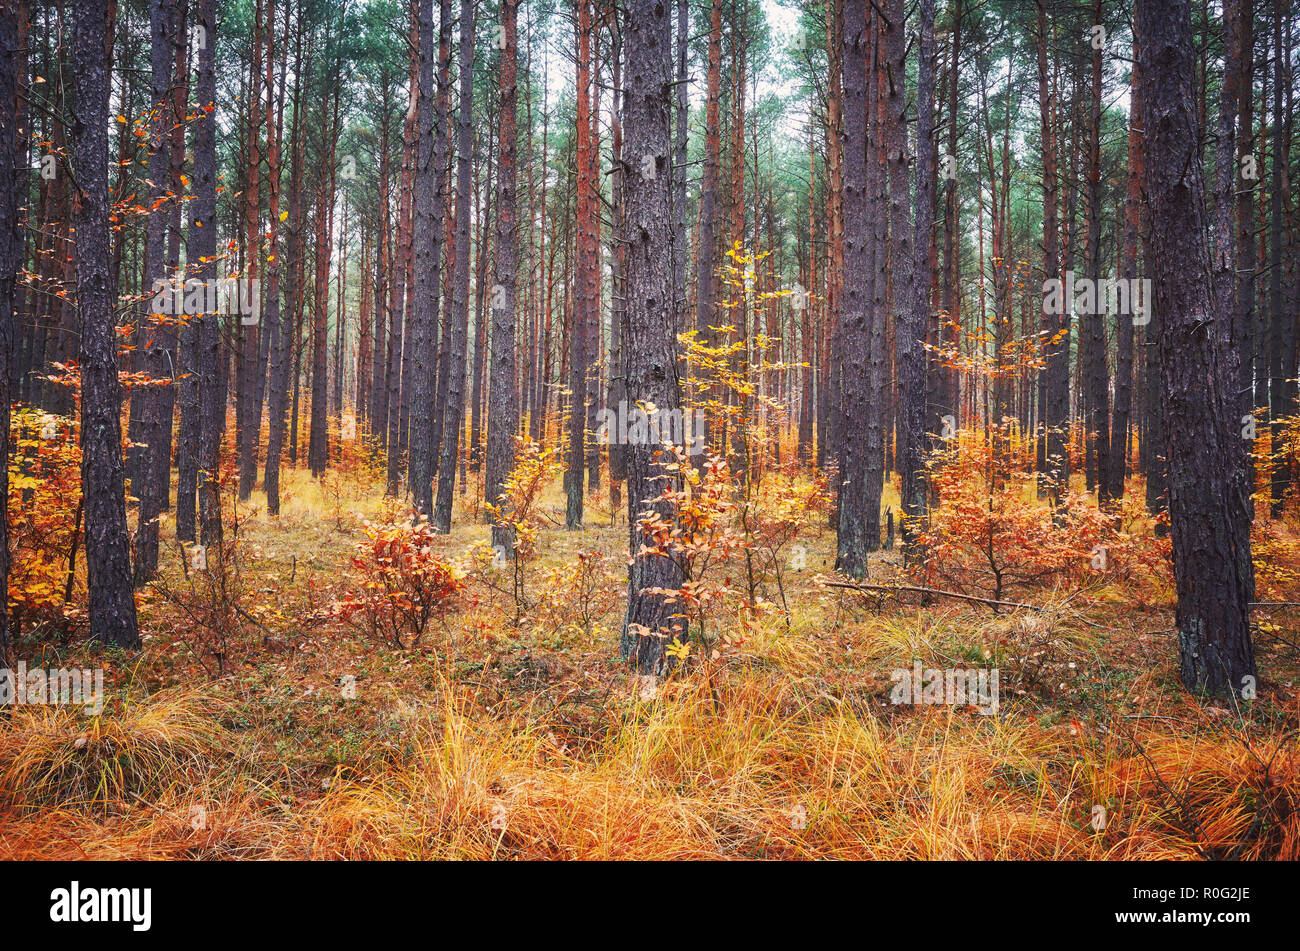 Picture of scenic autumnal forest landscape. Stock Photo